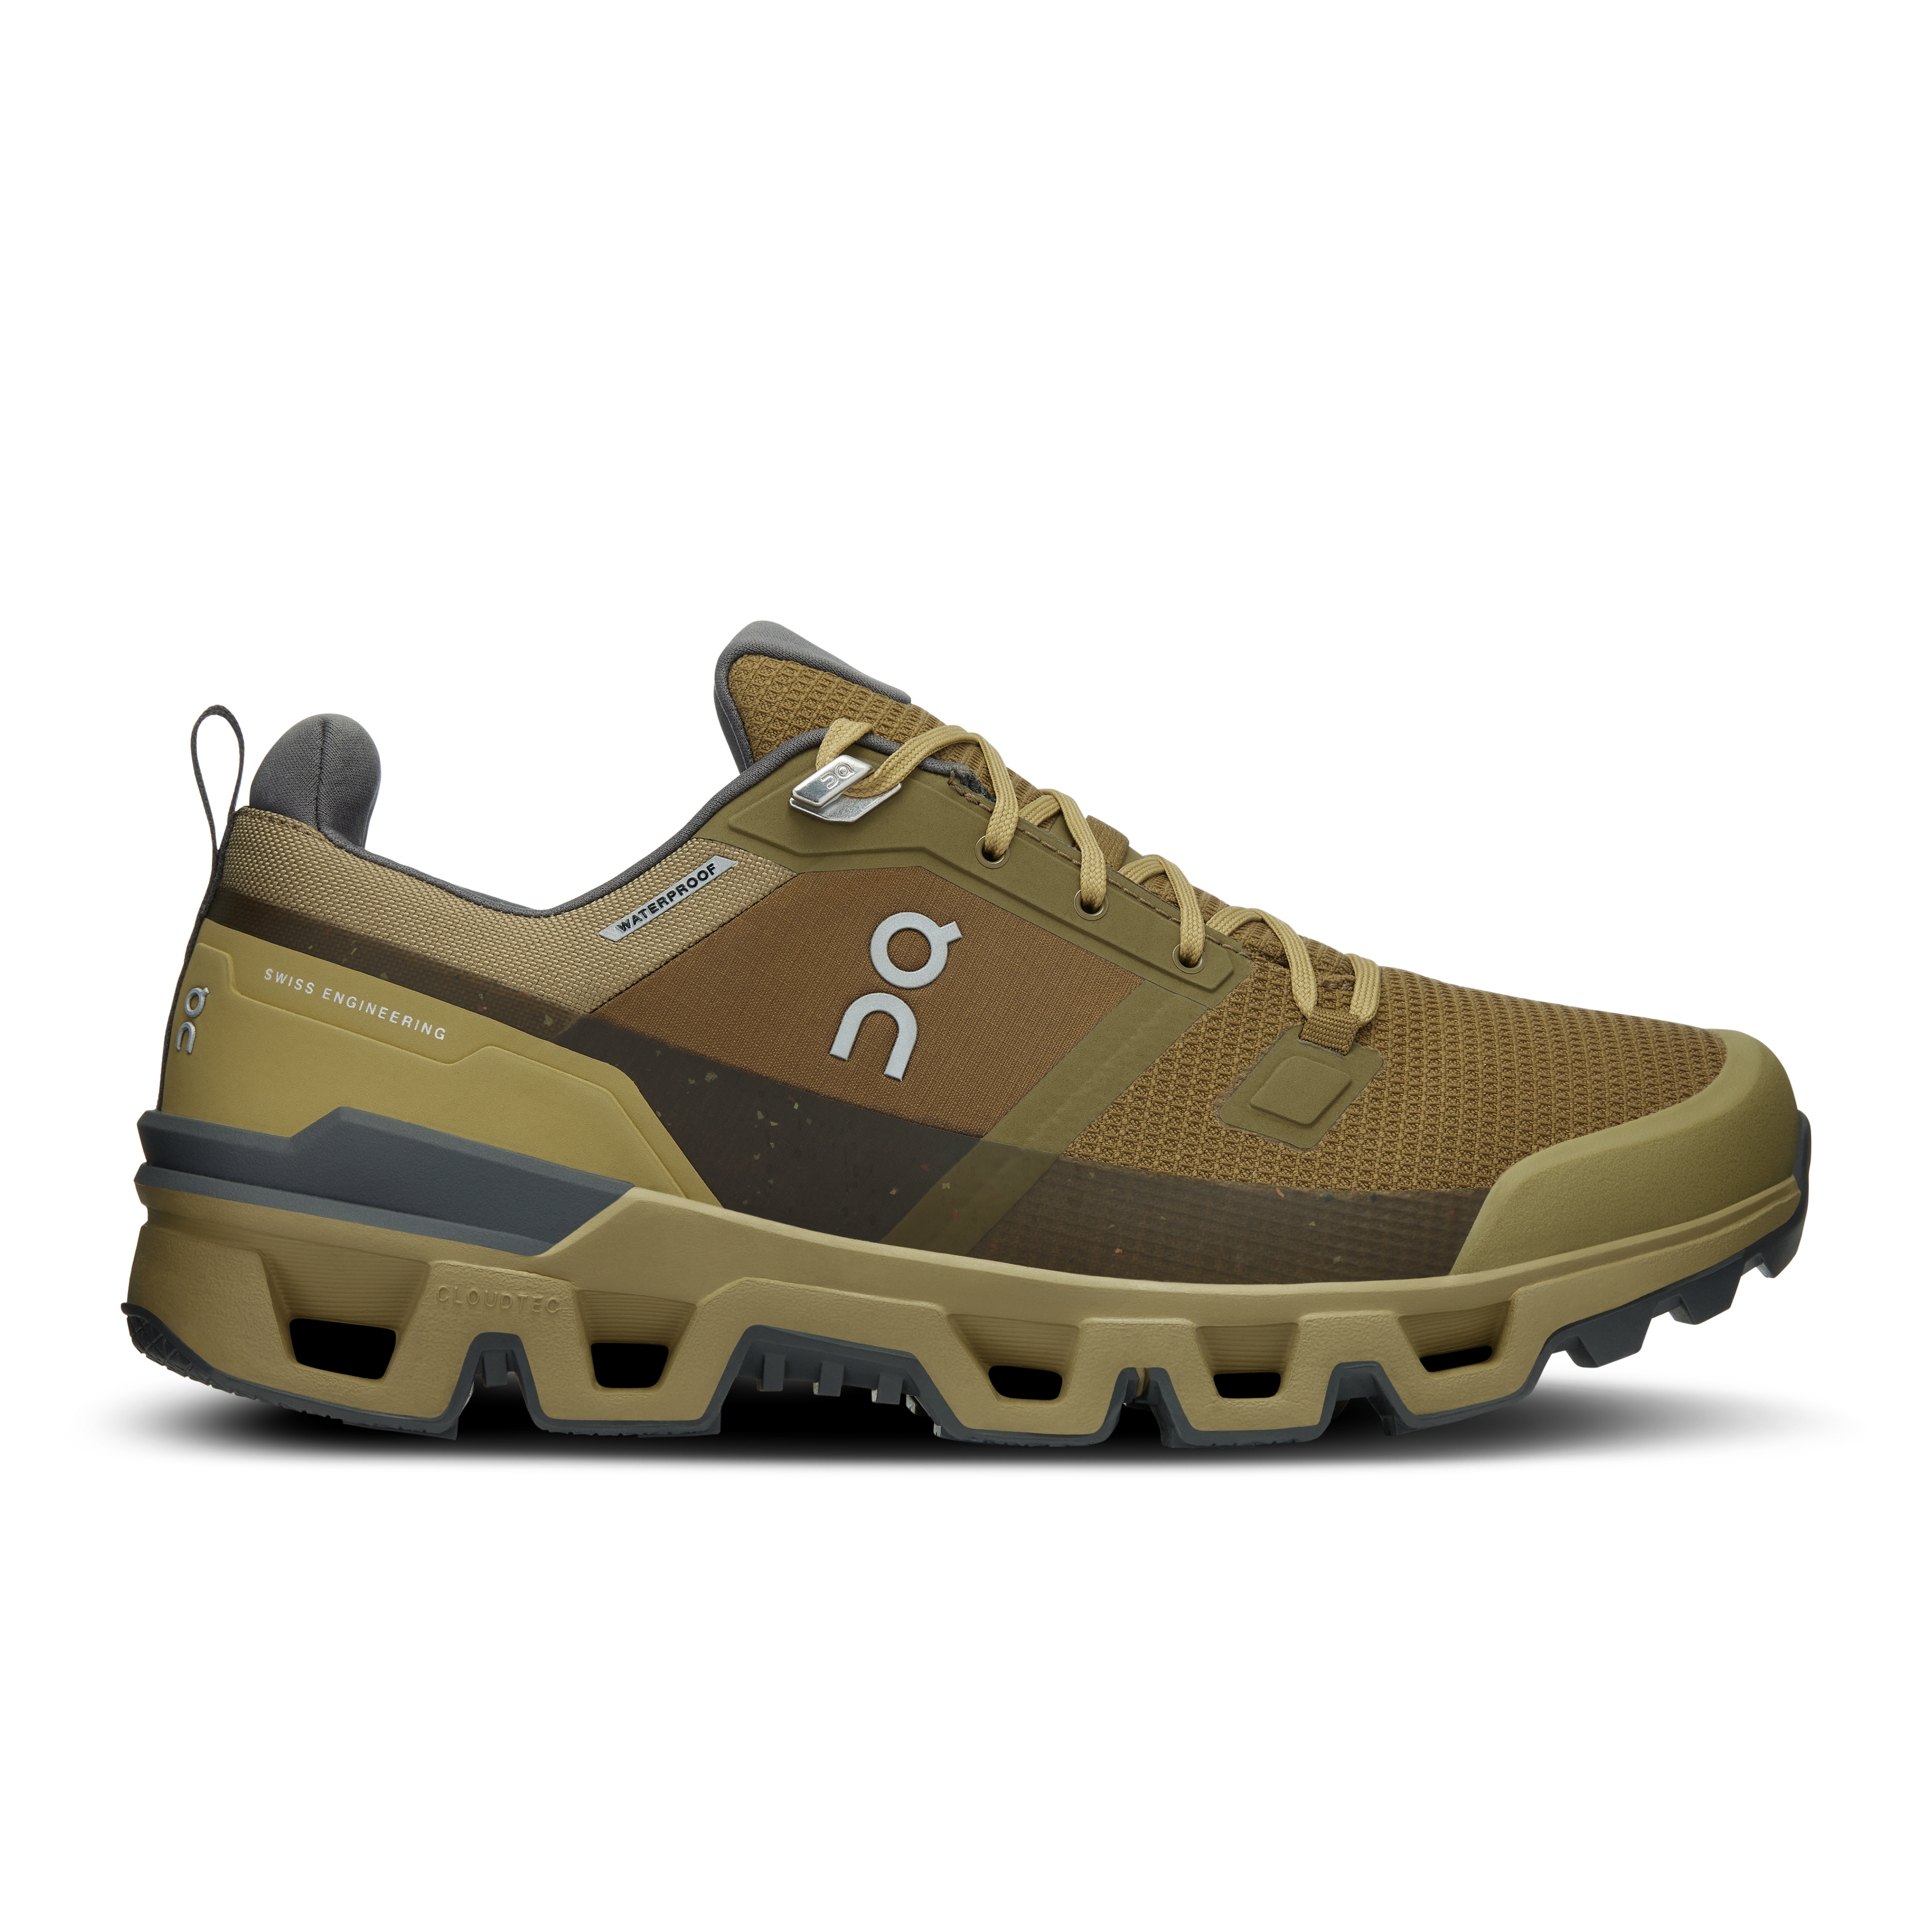 Men's Hiking Shoes & Boots